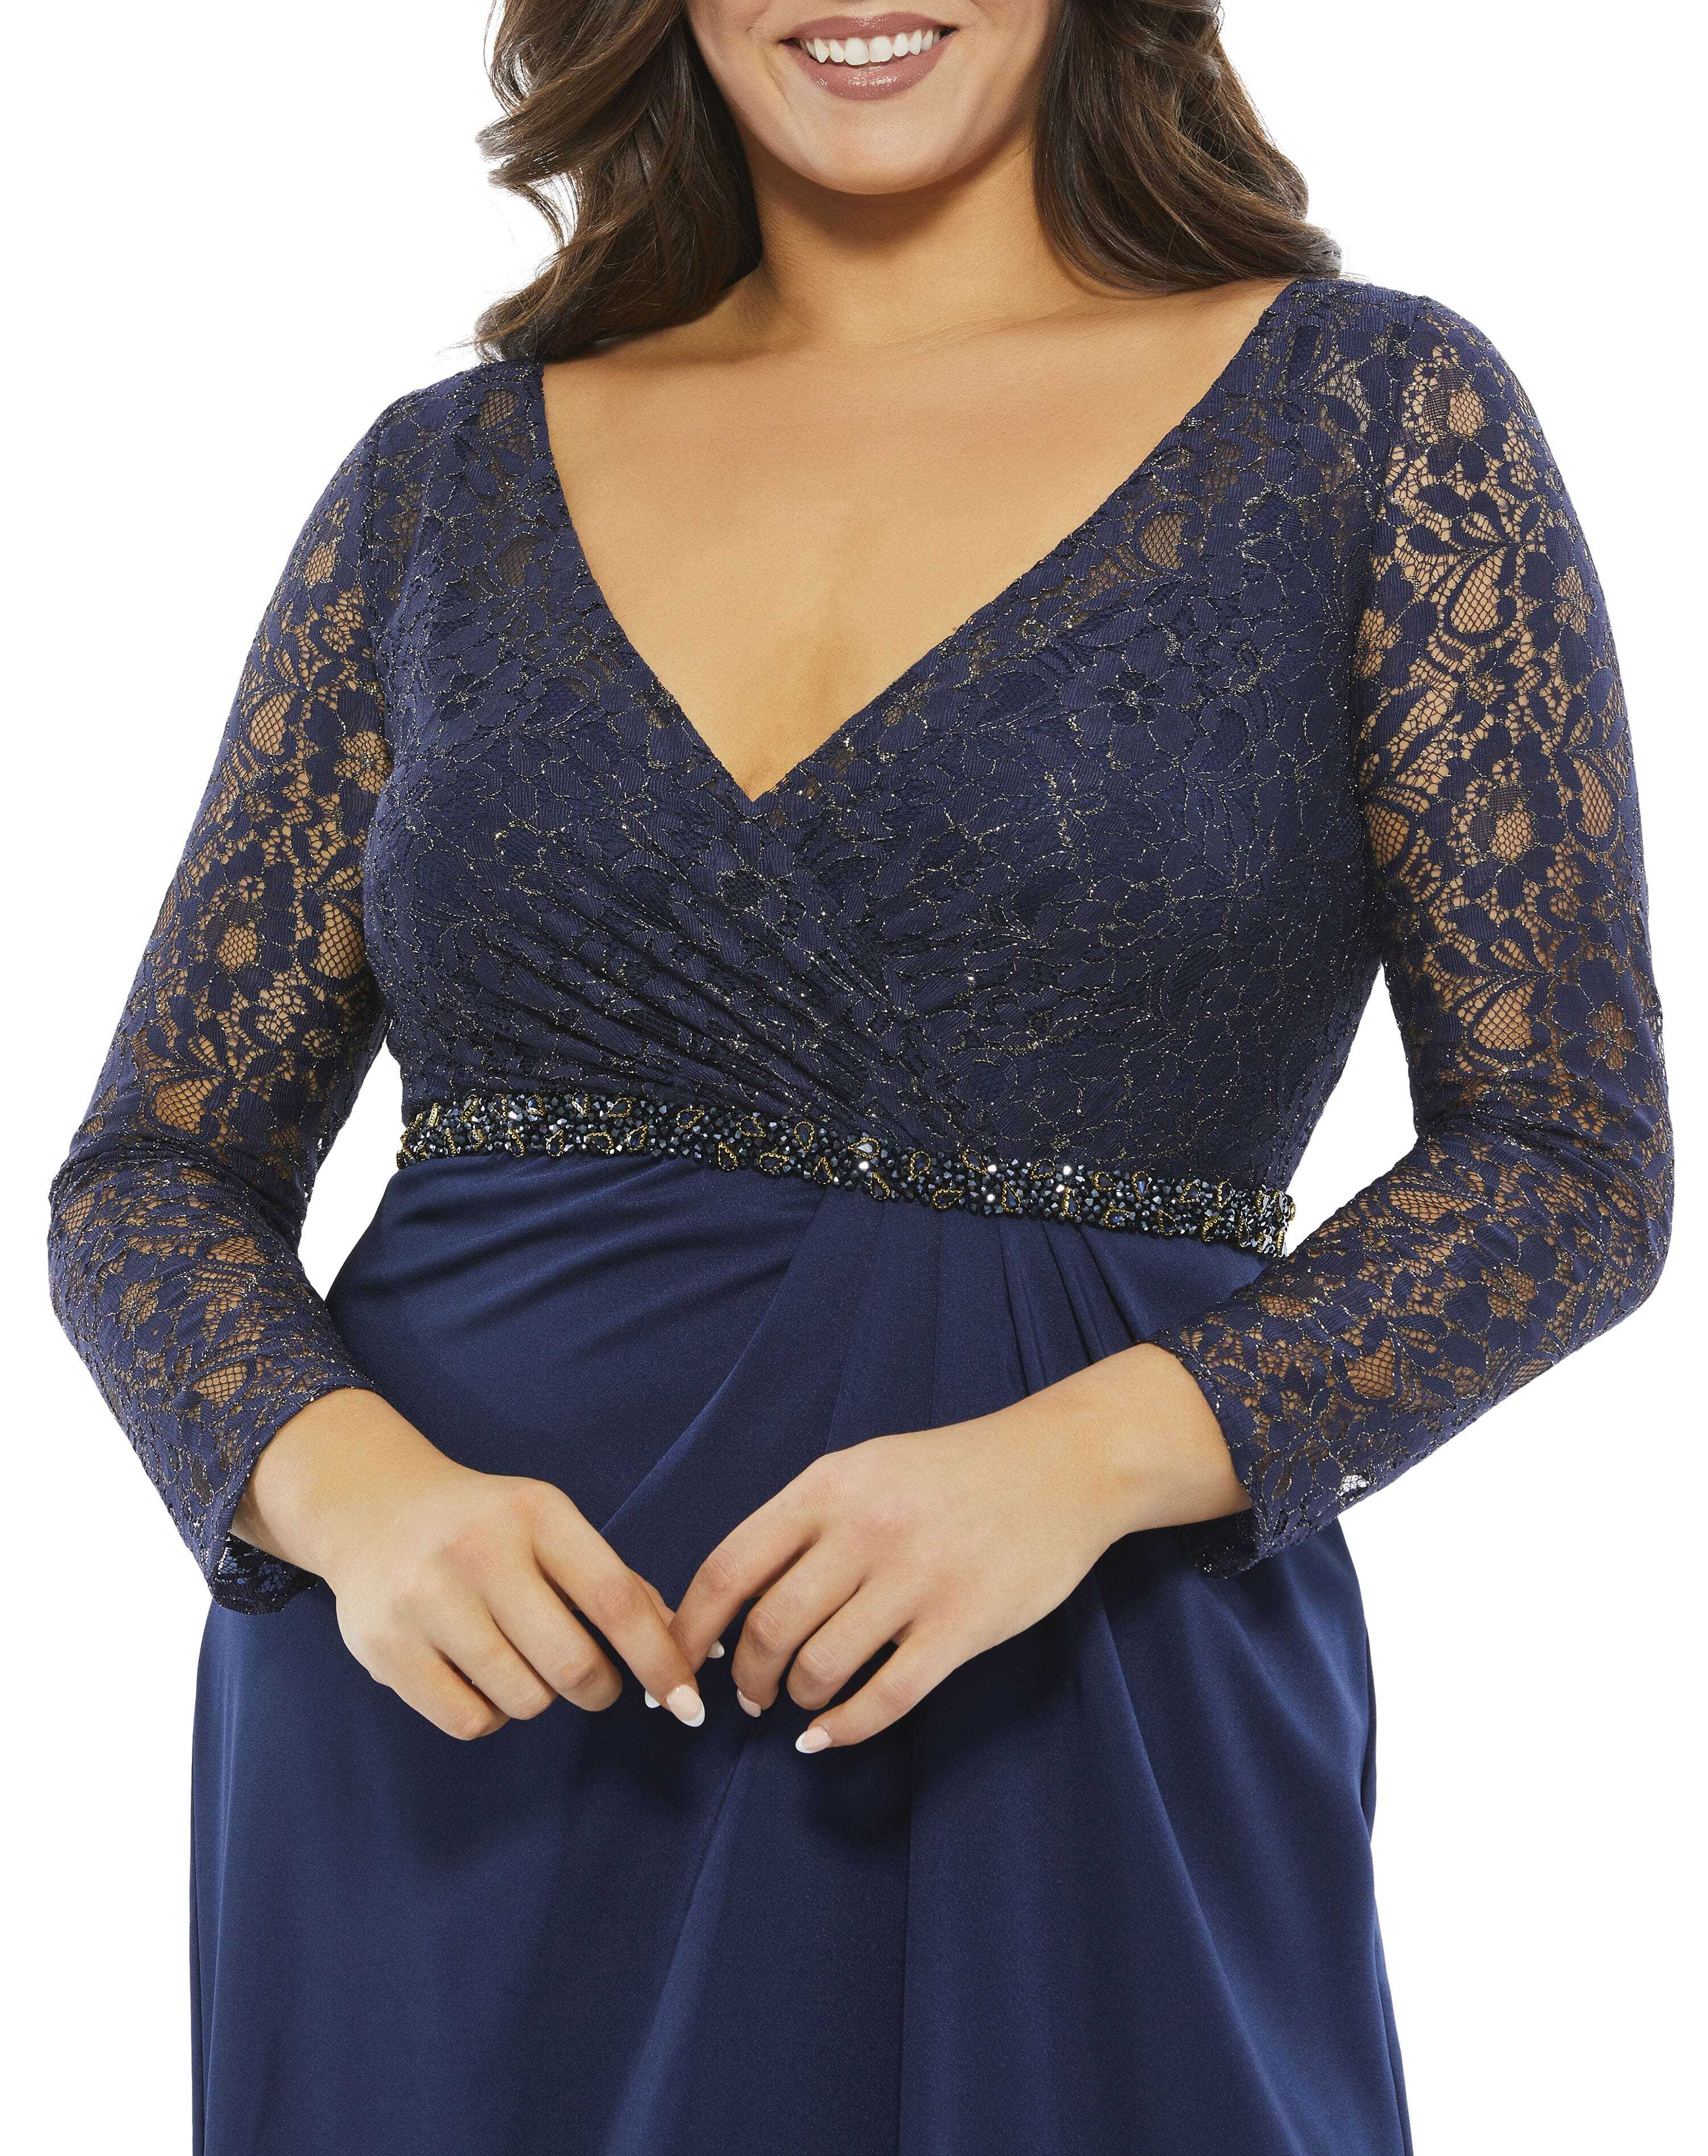 Lace Illusion Long Sleeve V-Neck Draped Gown (Plus)